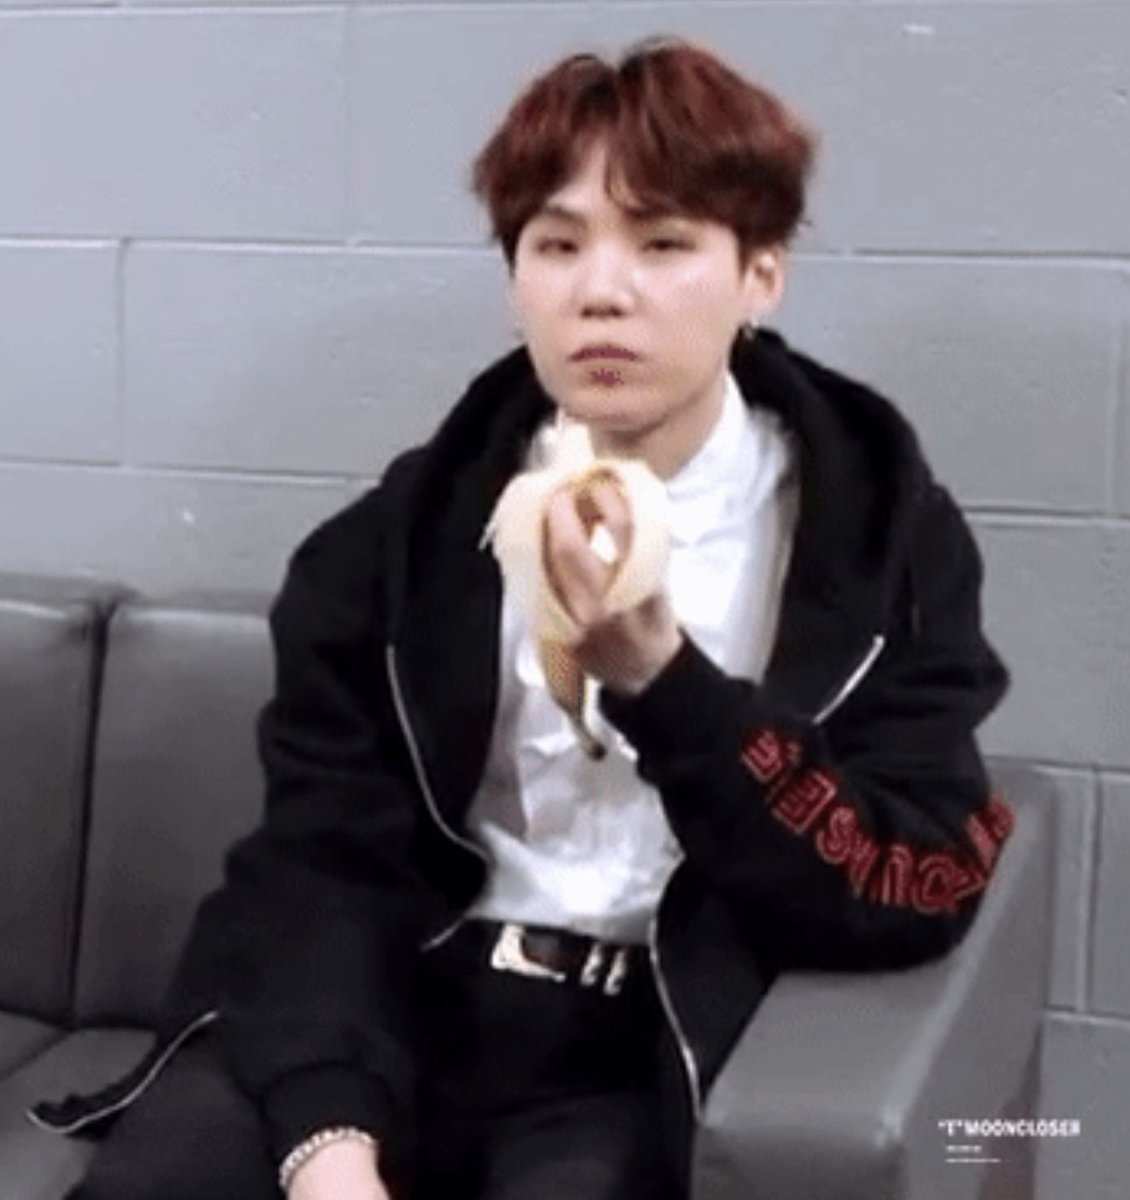 end of thread, thank you for enjoying yoongi's love for bananas <3